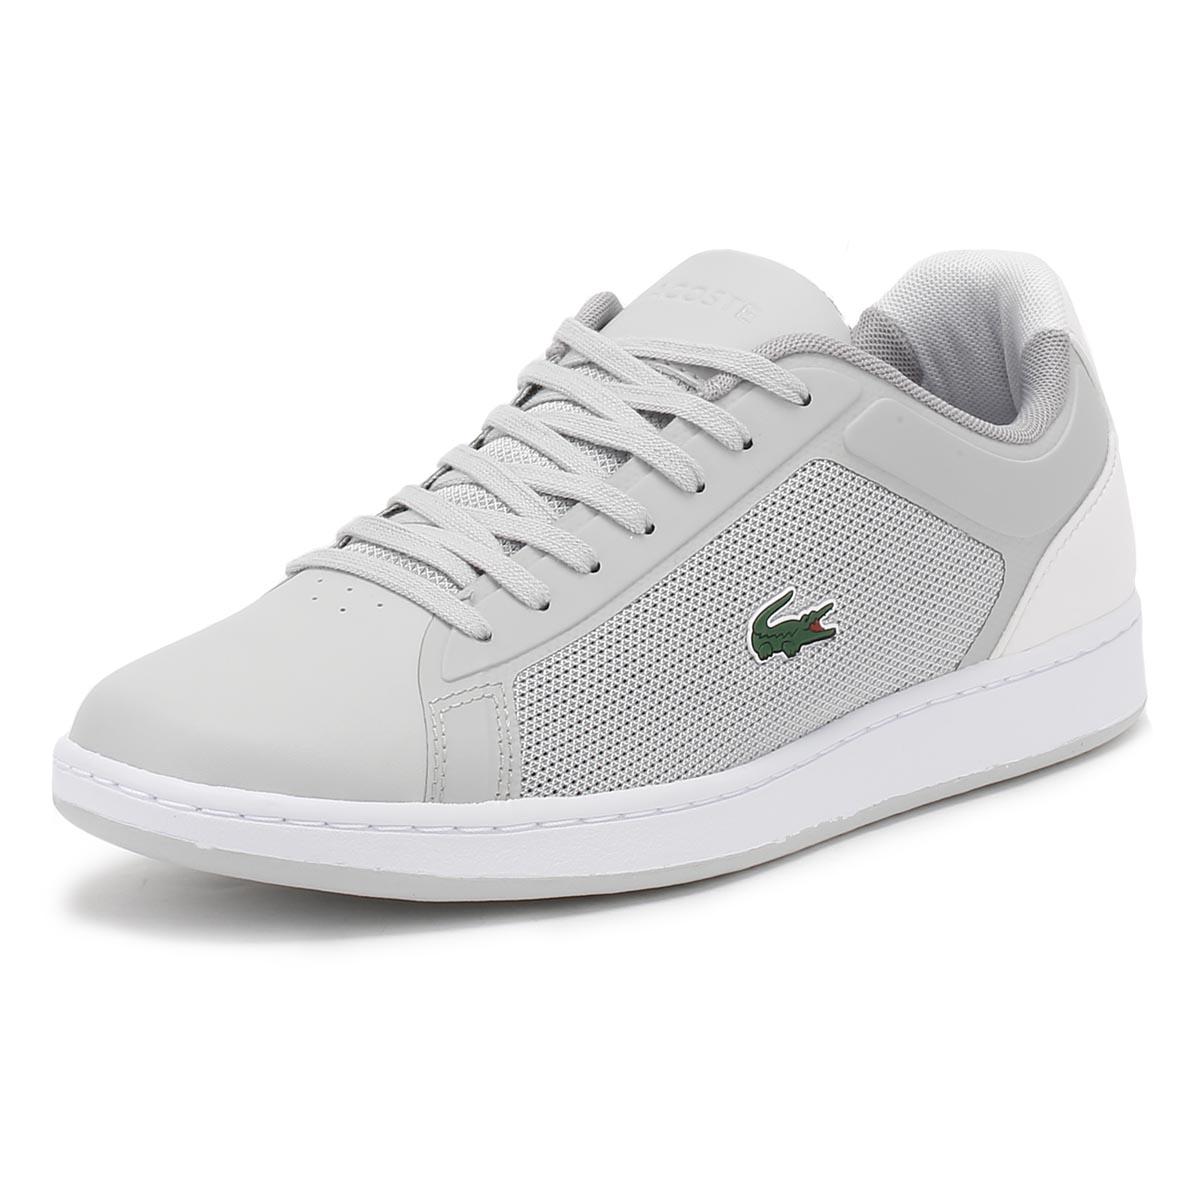 Lacoste Synthetic Mens Light Grey Endliner 217 1 Spm Trainers in Gray ...